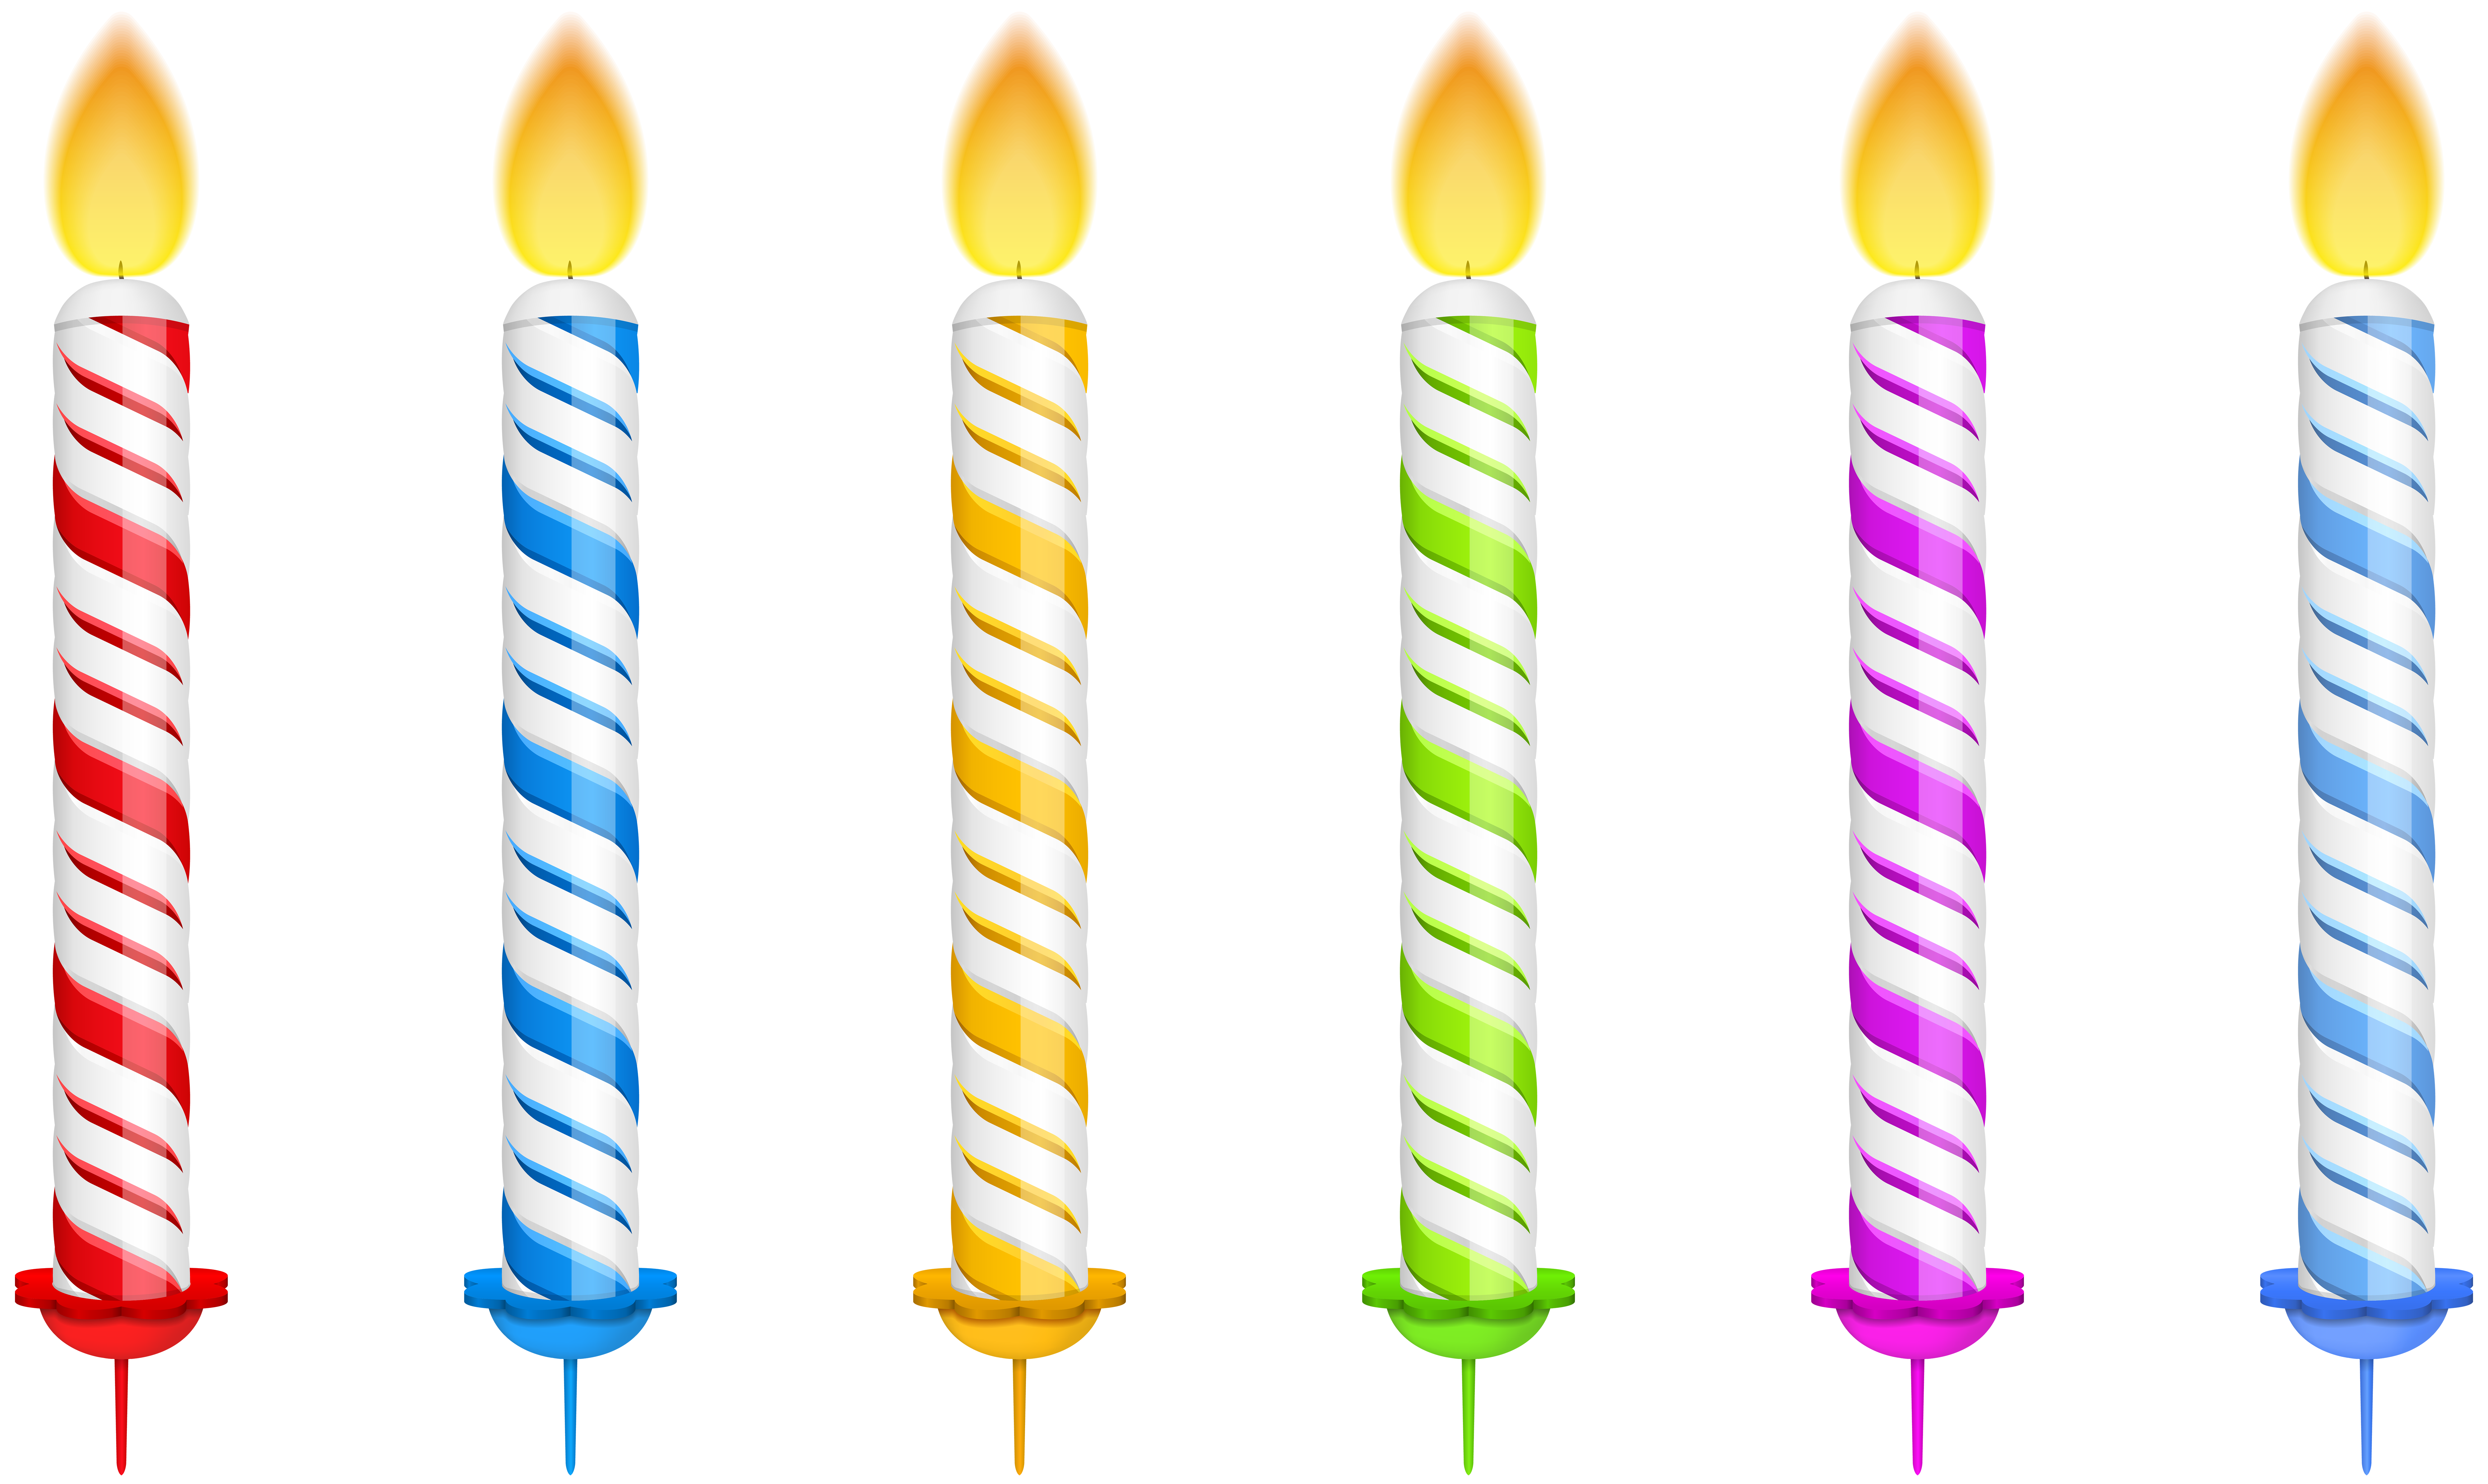 cQFBNG birthday candles icon clipart